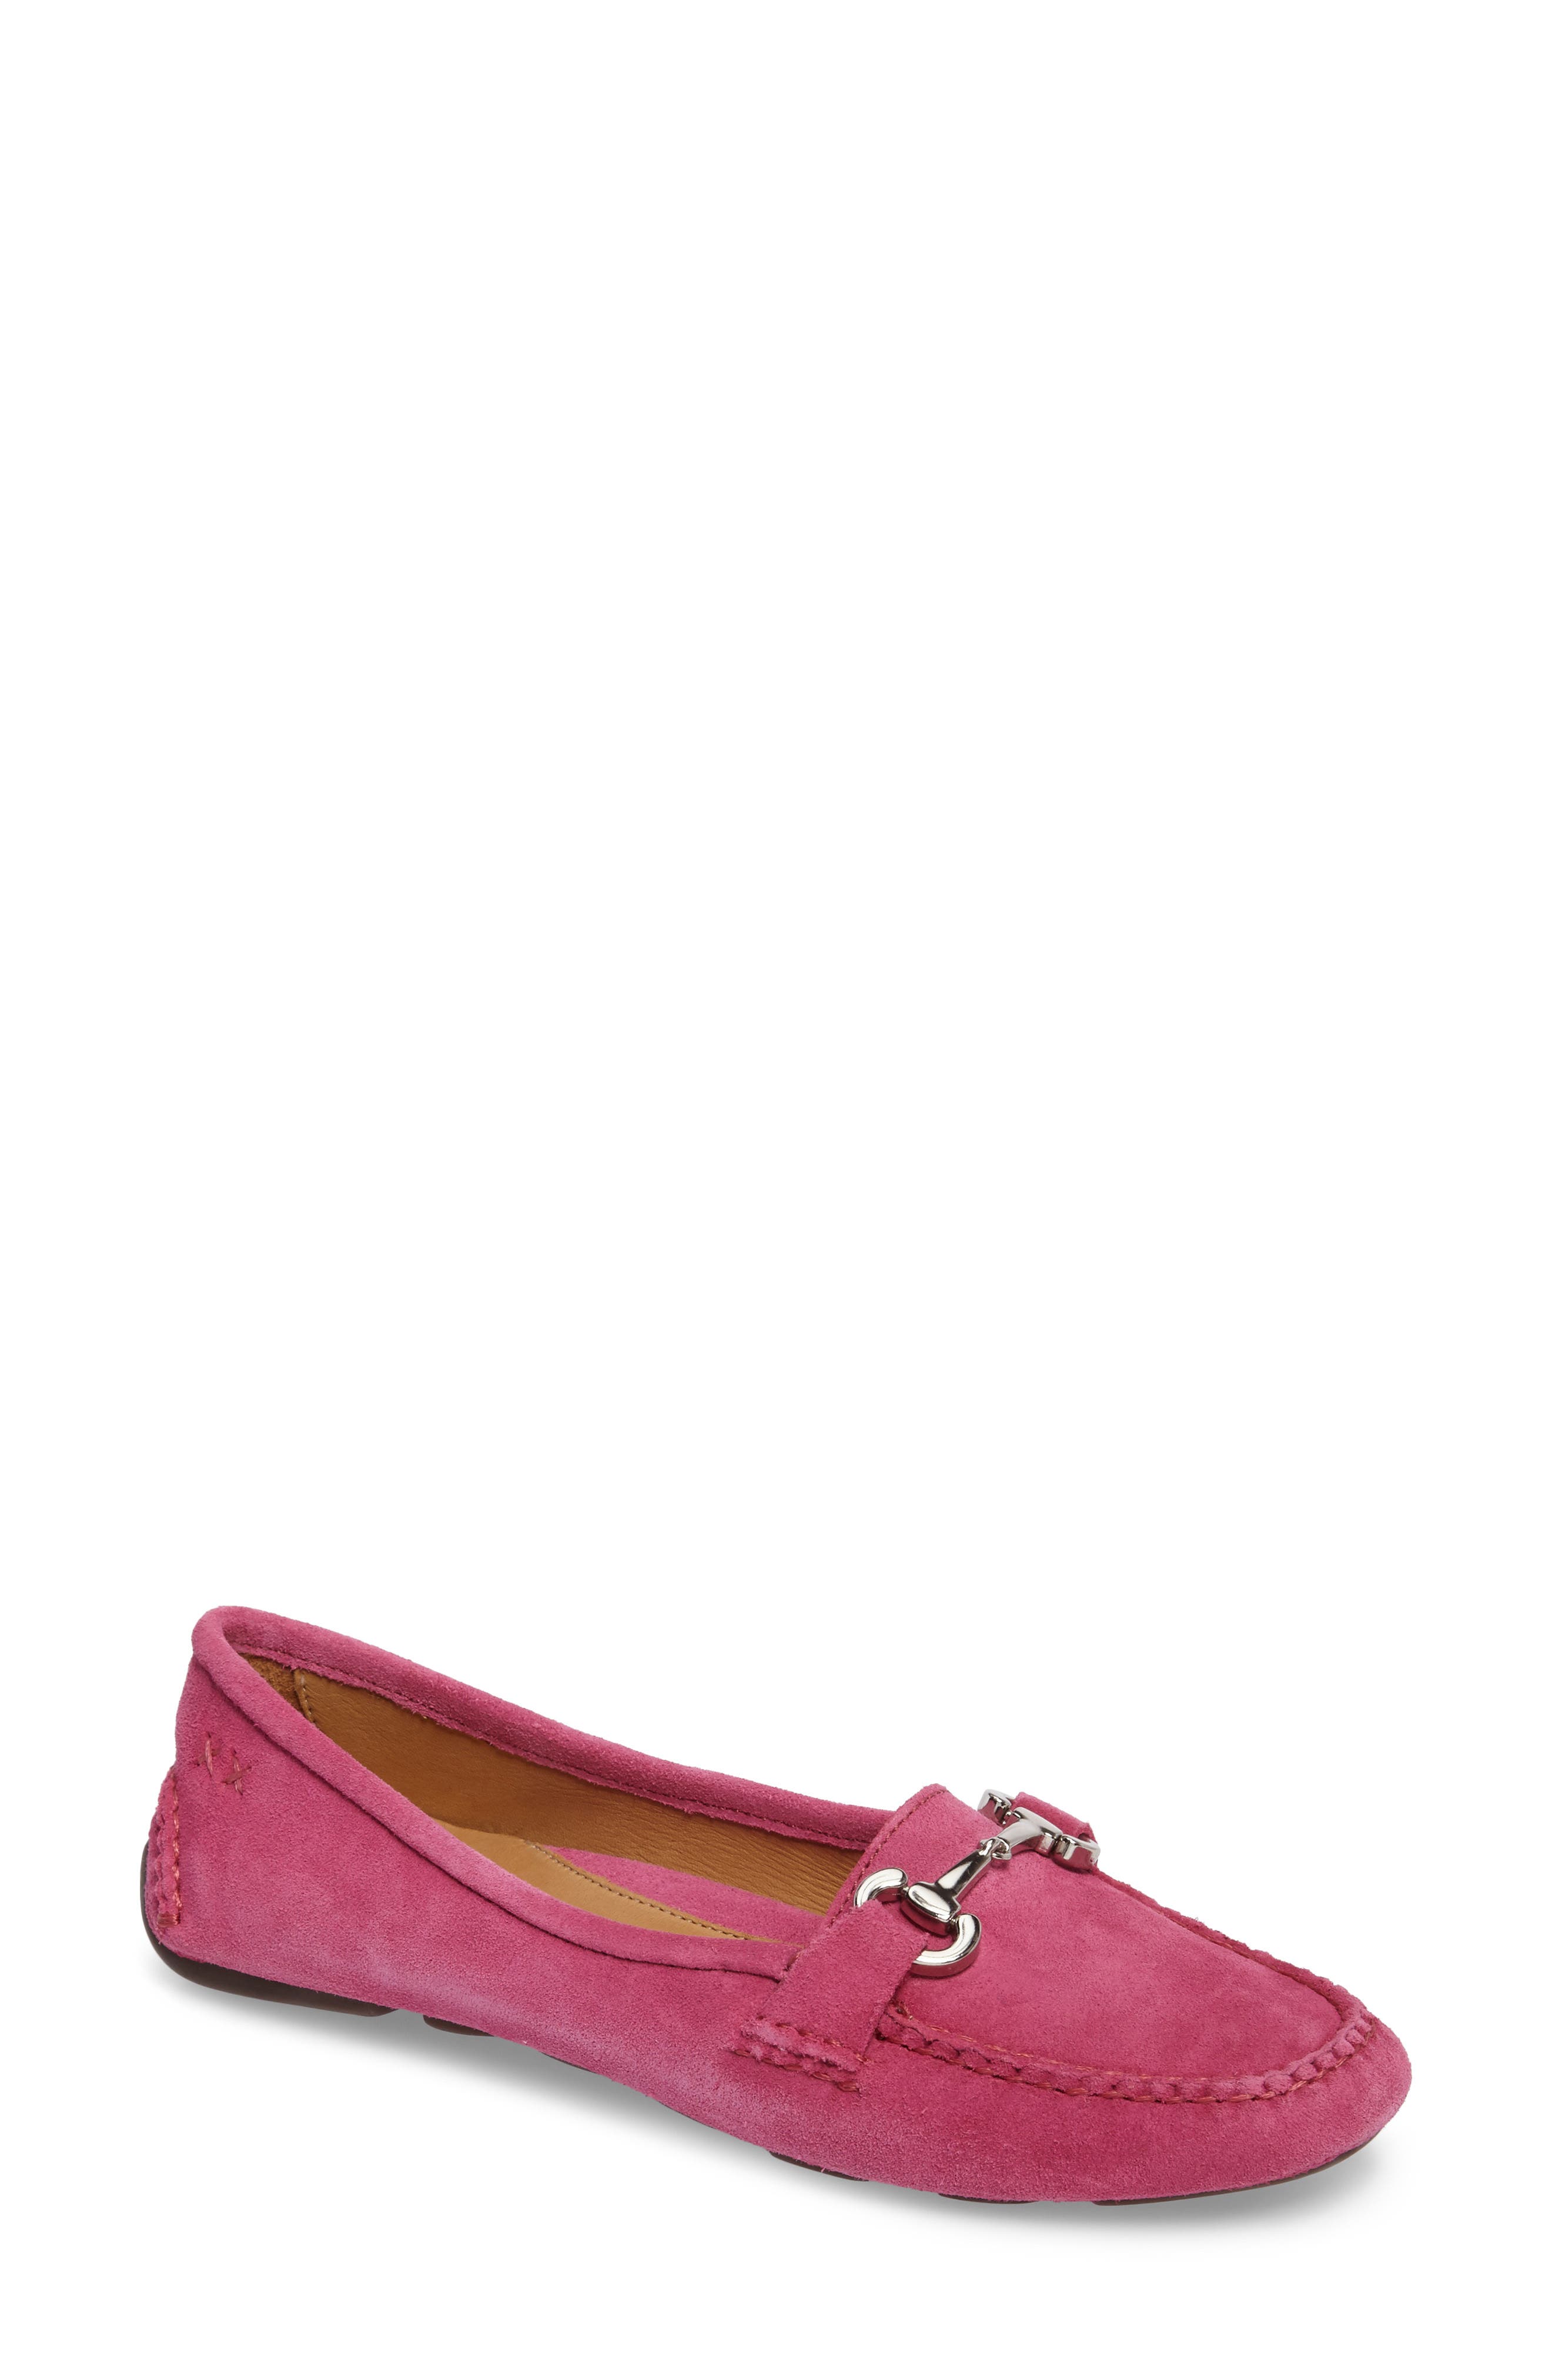 patricia green 'Carrie' Loafer (Women 